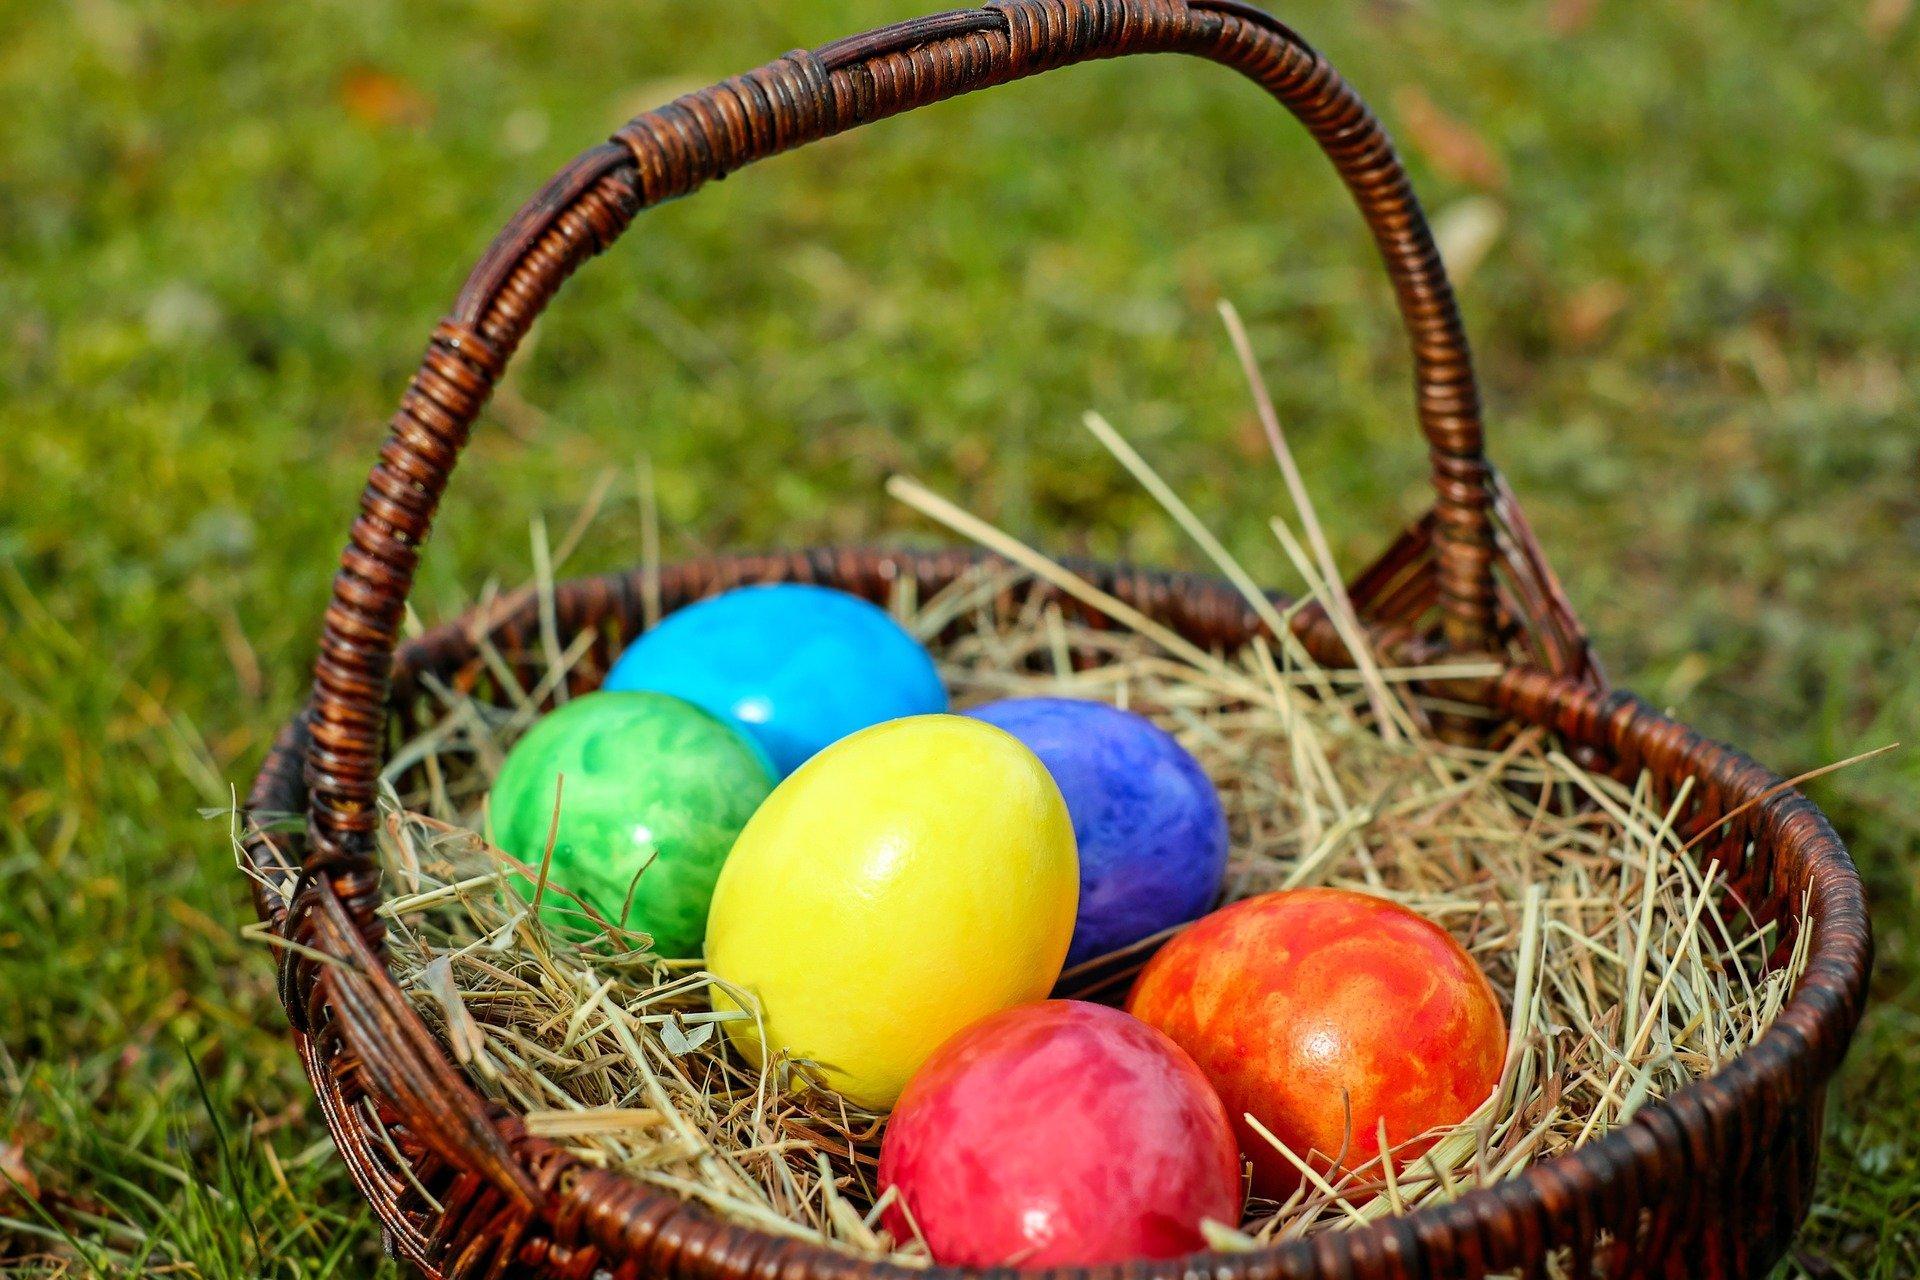 Basket with colored Easter eggs